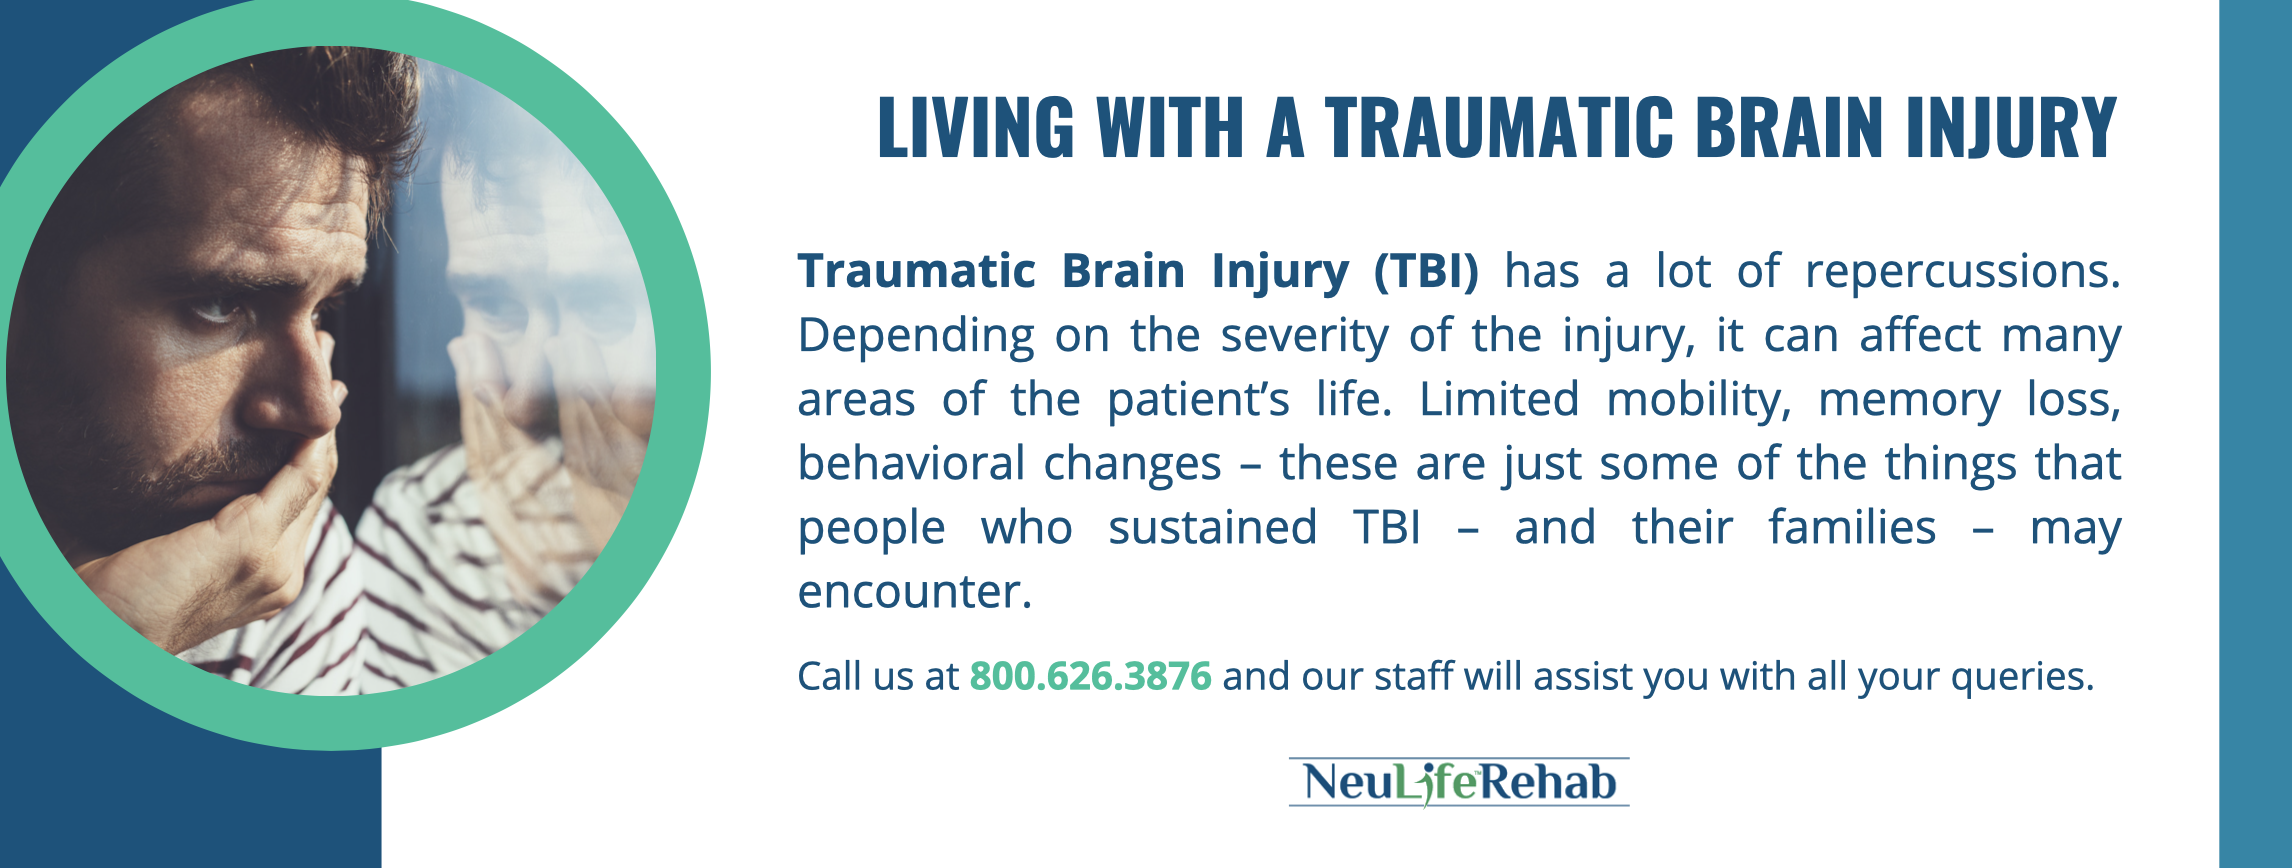 Living with a Traumatic Brain Injury